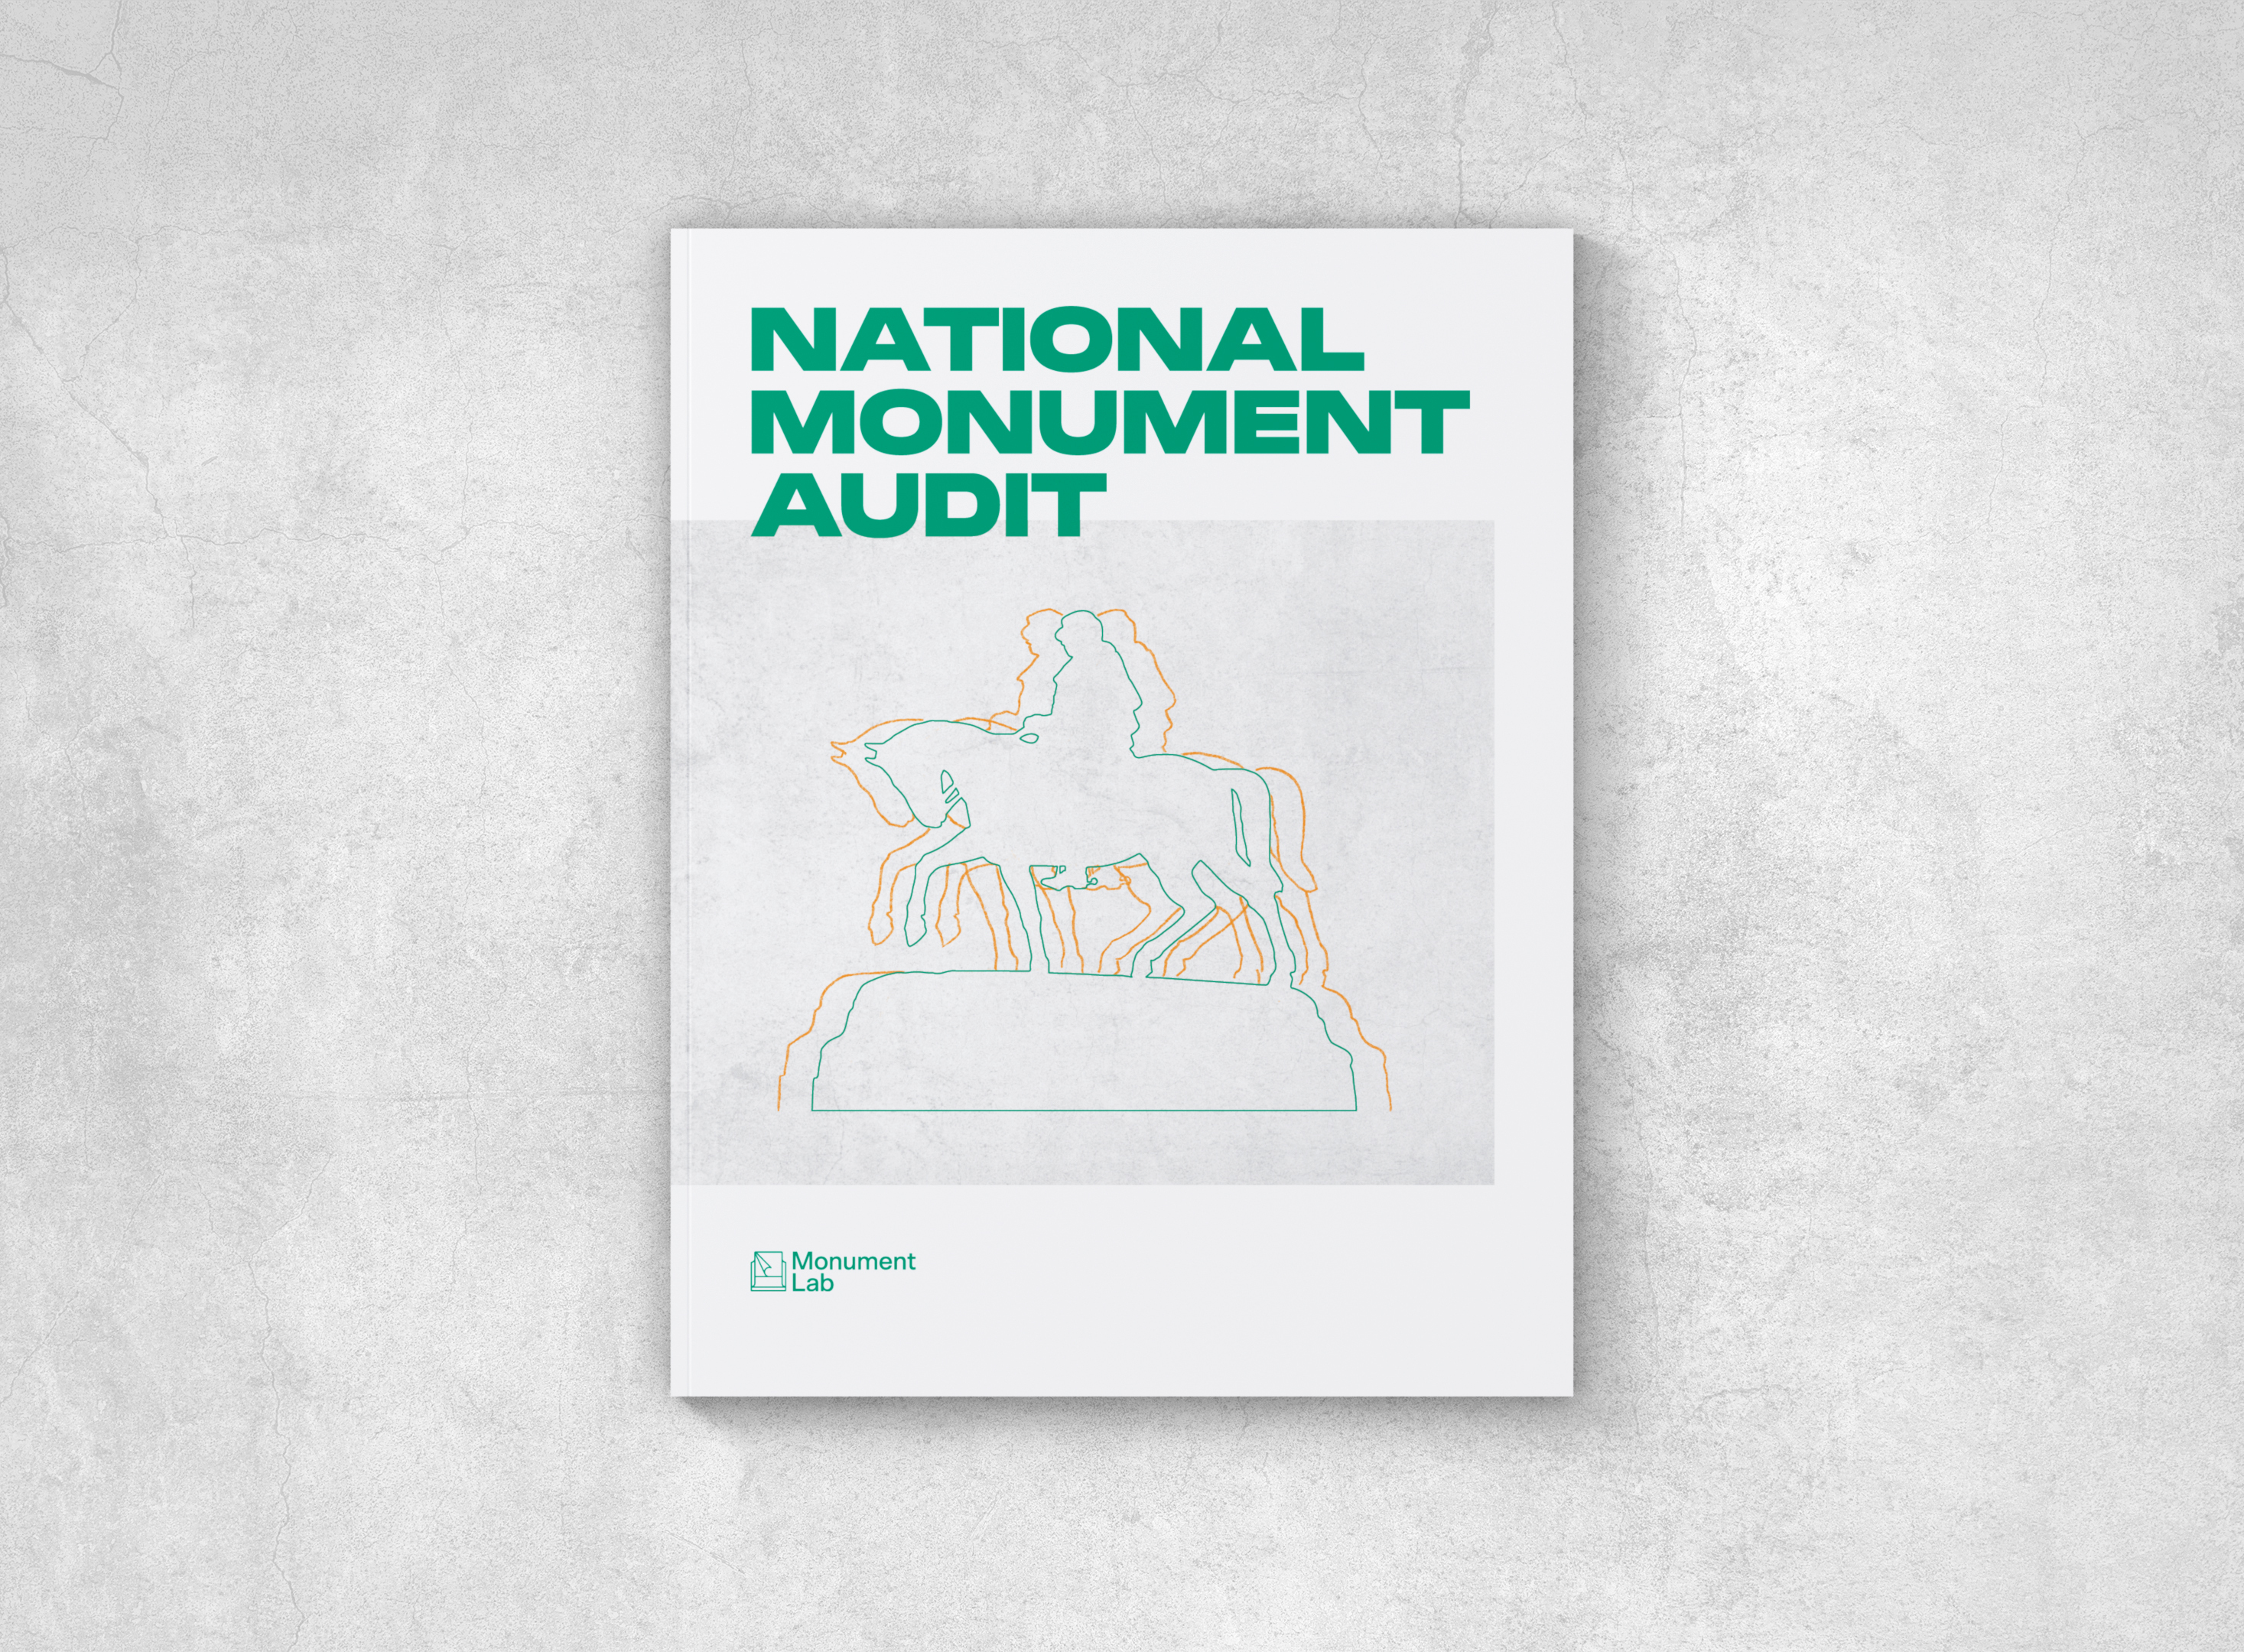 Monument Lab Audit cover with an outline of a monument of a person on horseback